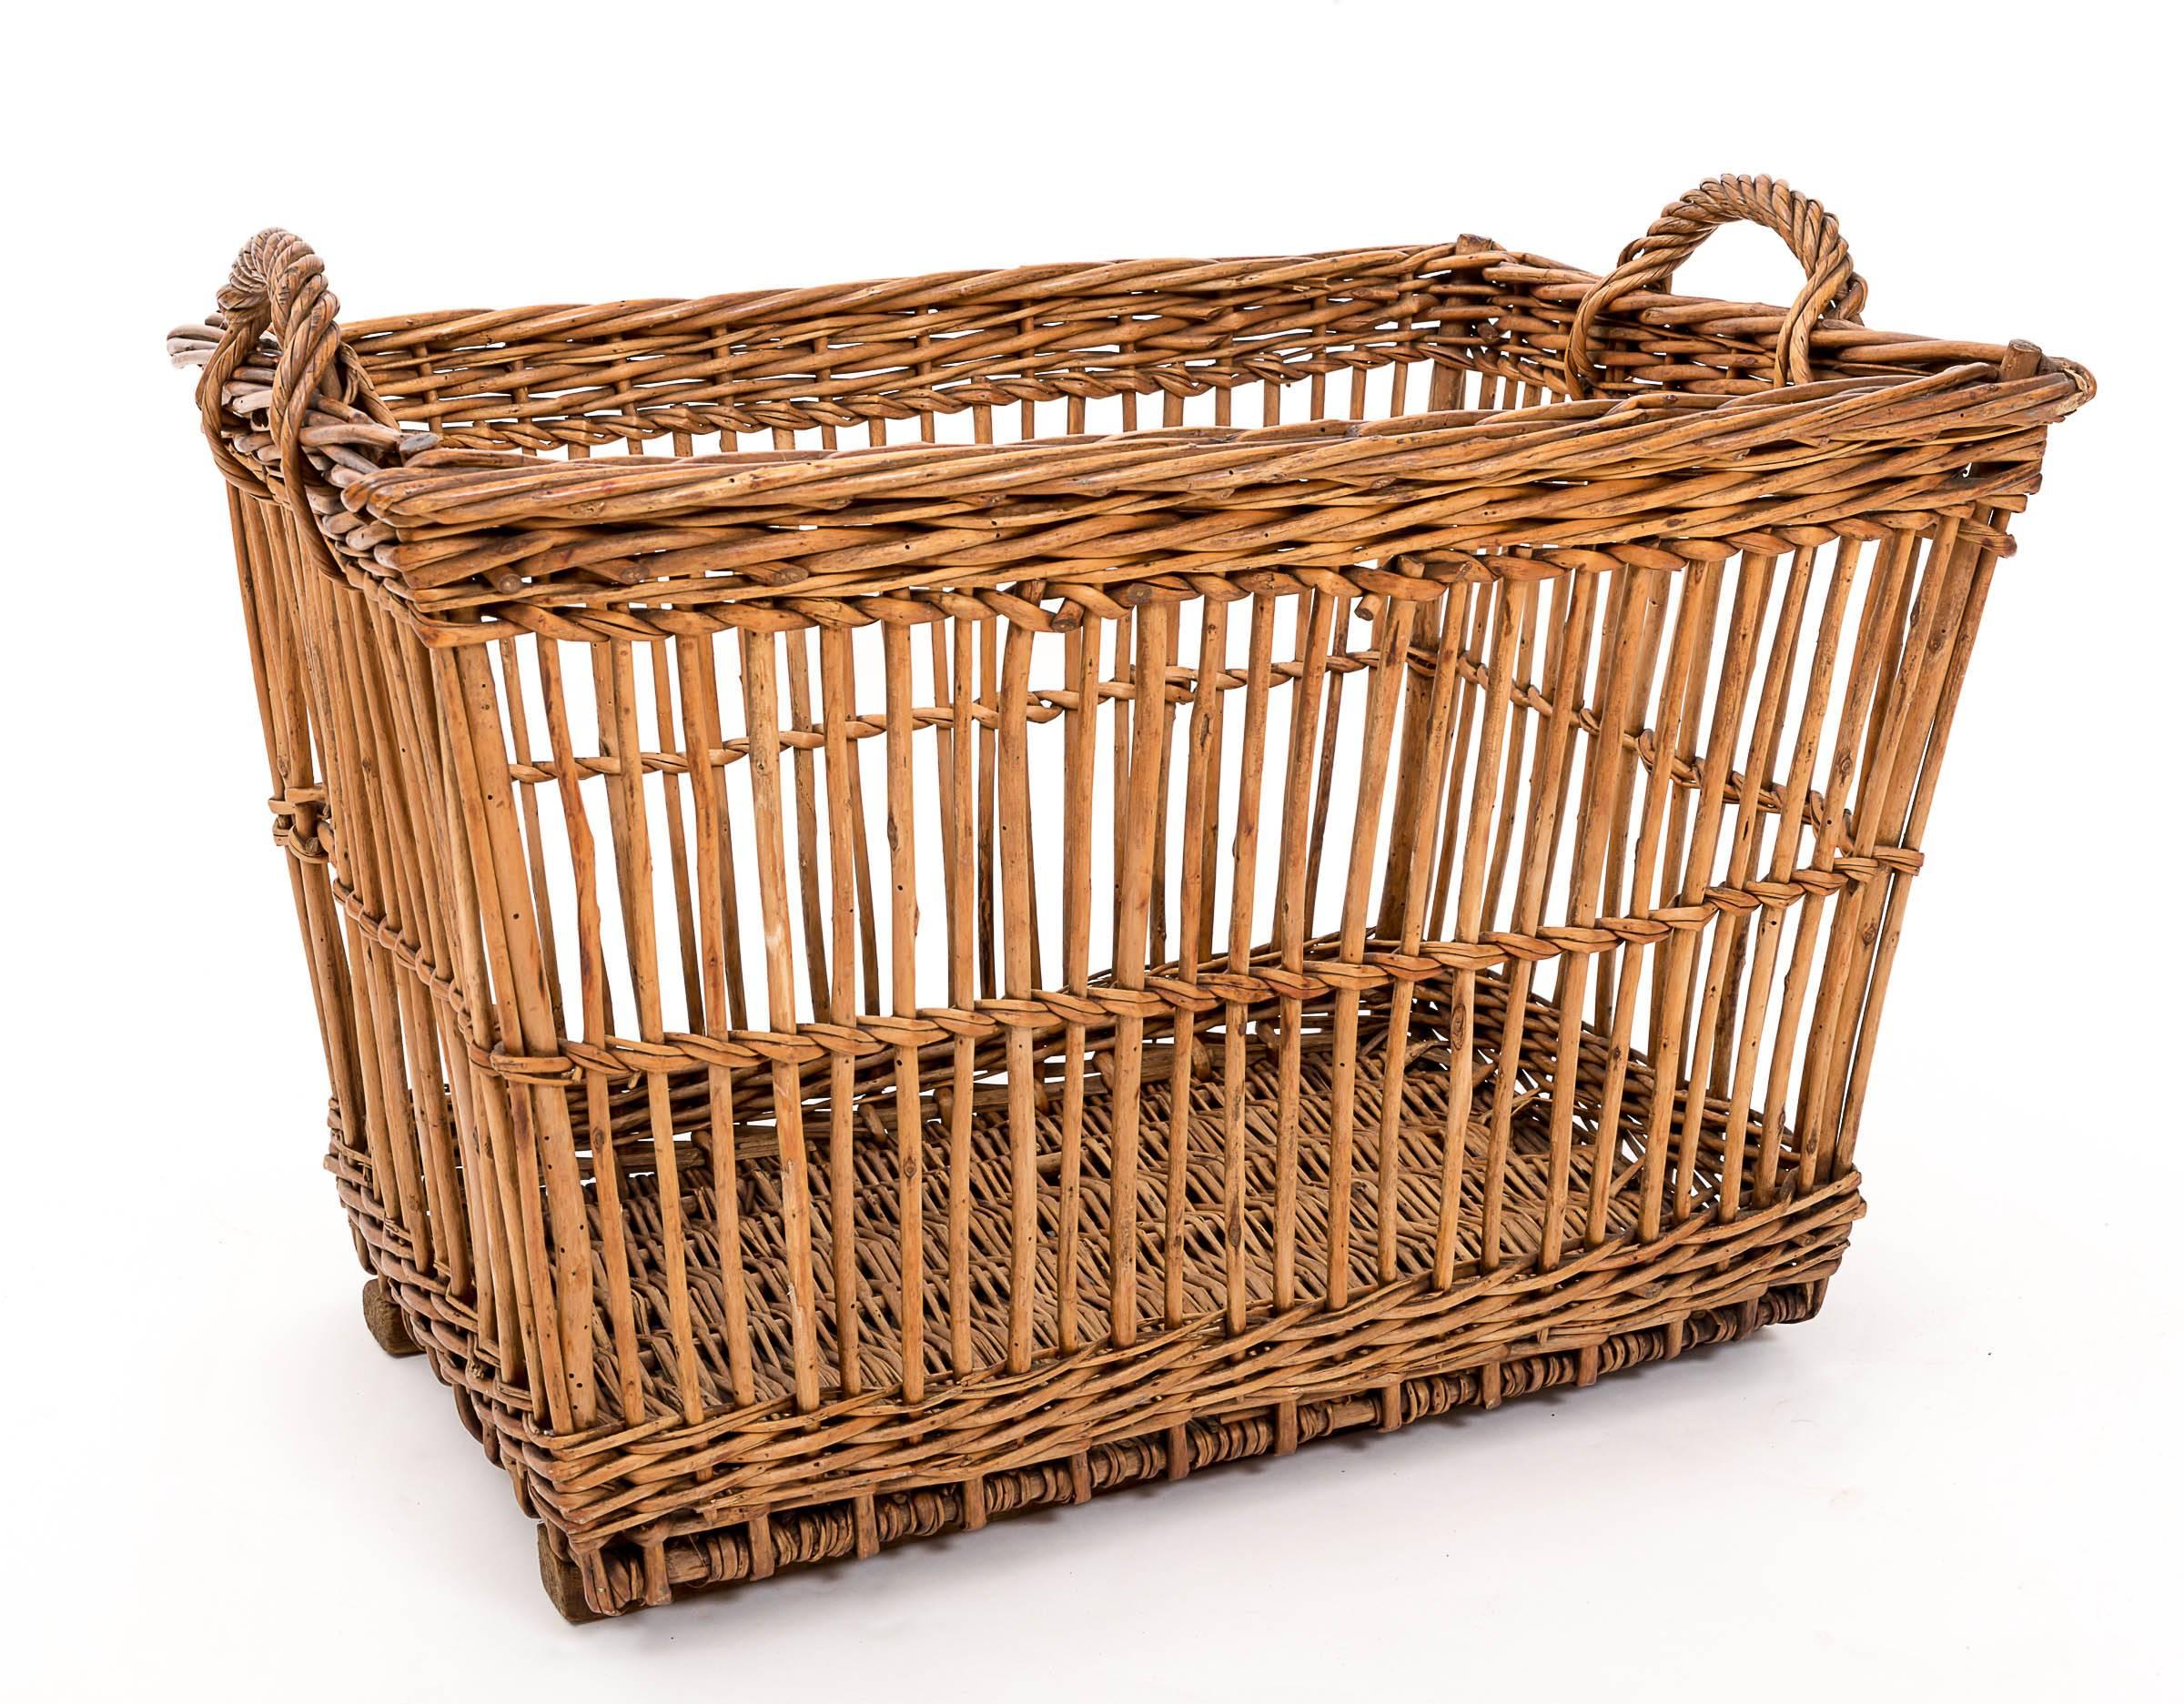 French Turn-of-the-Century Wicker Vineyard Basket, Alsace, France, circa 1900